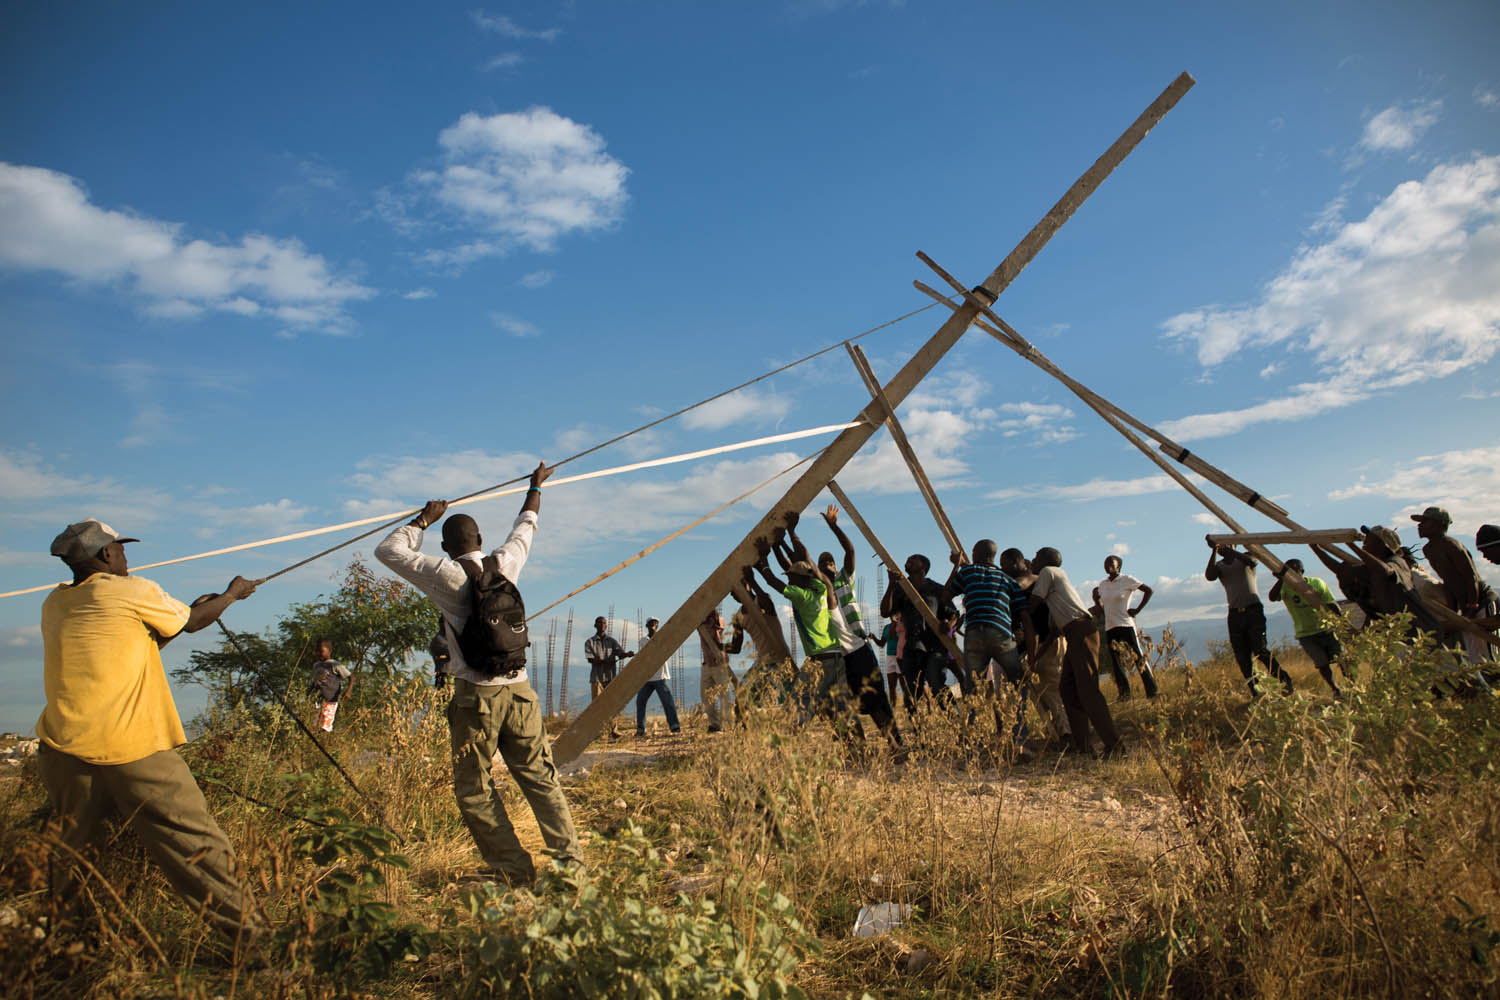 Residents of Canaan raise the first of three handmade utility poles, part of an improvised effort to receive electricity from the state power grid. Photo by Allison Shelley.